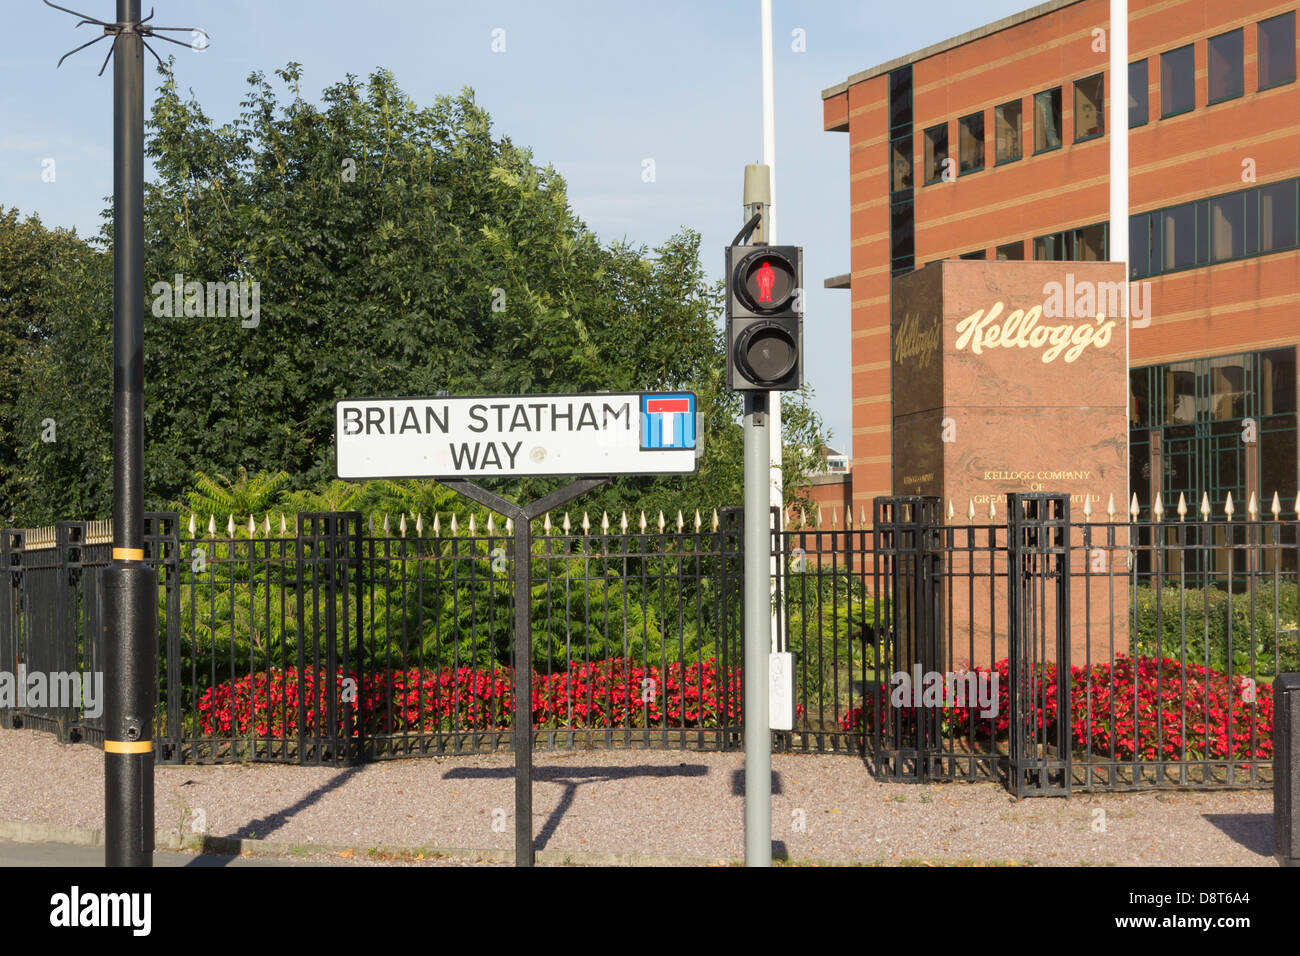 Street sign for Brian Statham Way near the Lancashire cricket ground, Old Trafford, and the Kelloggs factory. Stock Photo